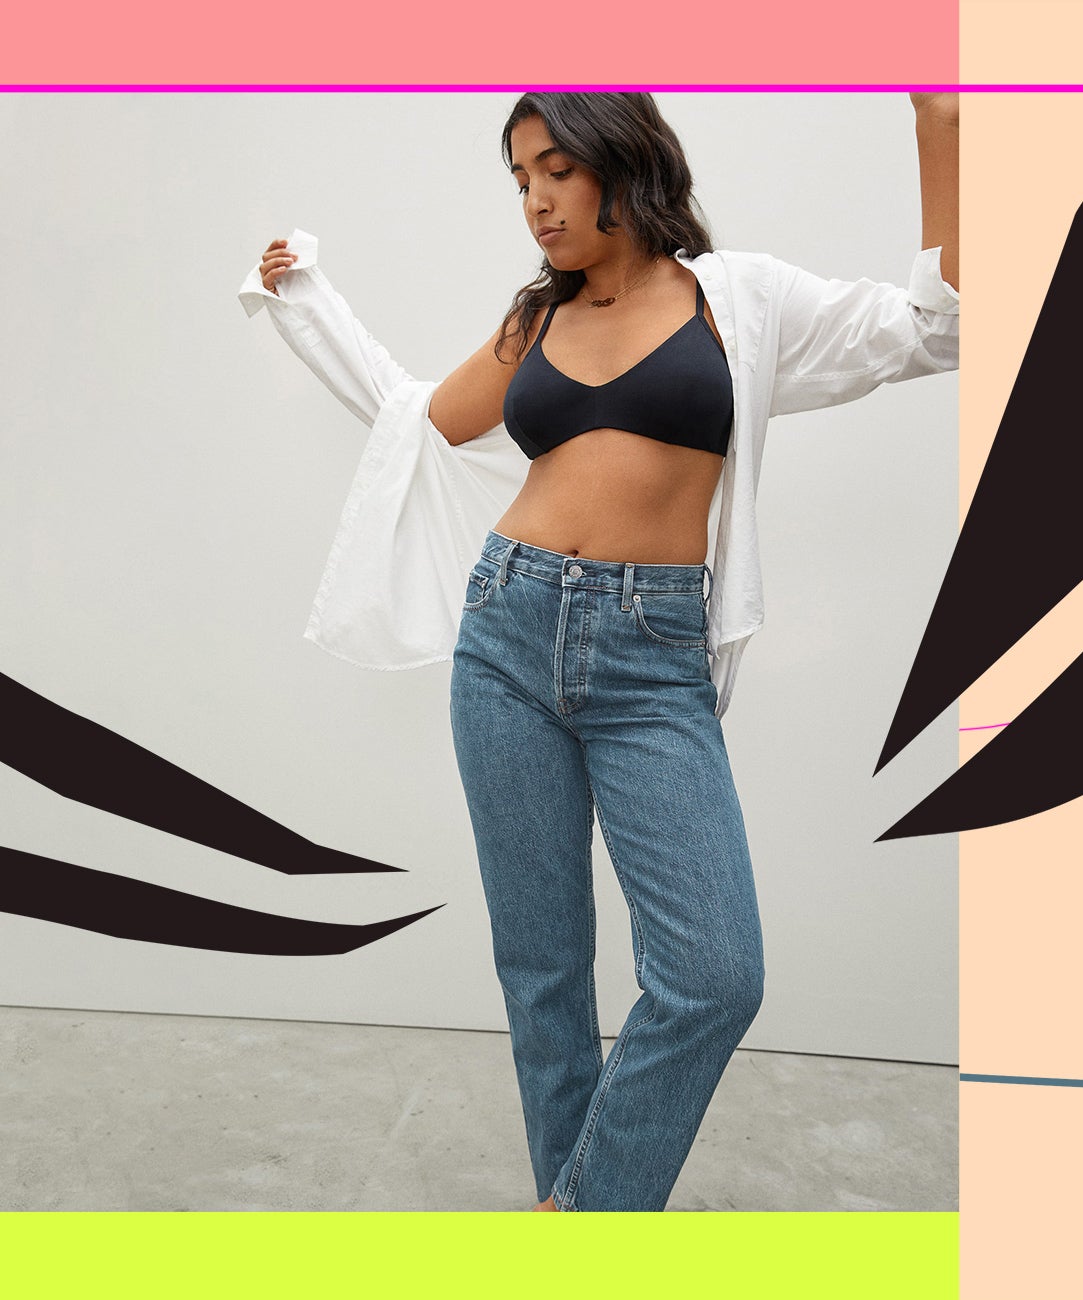 17 Best Jeans for Women to Shop in 2021: Levi's, Reformation